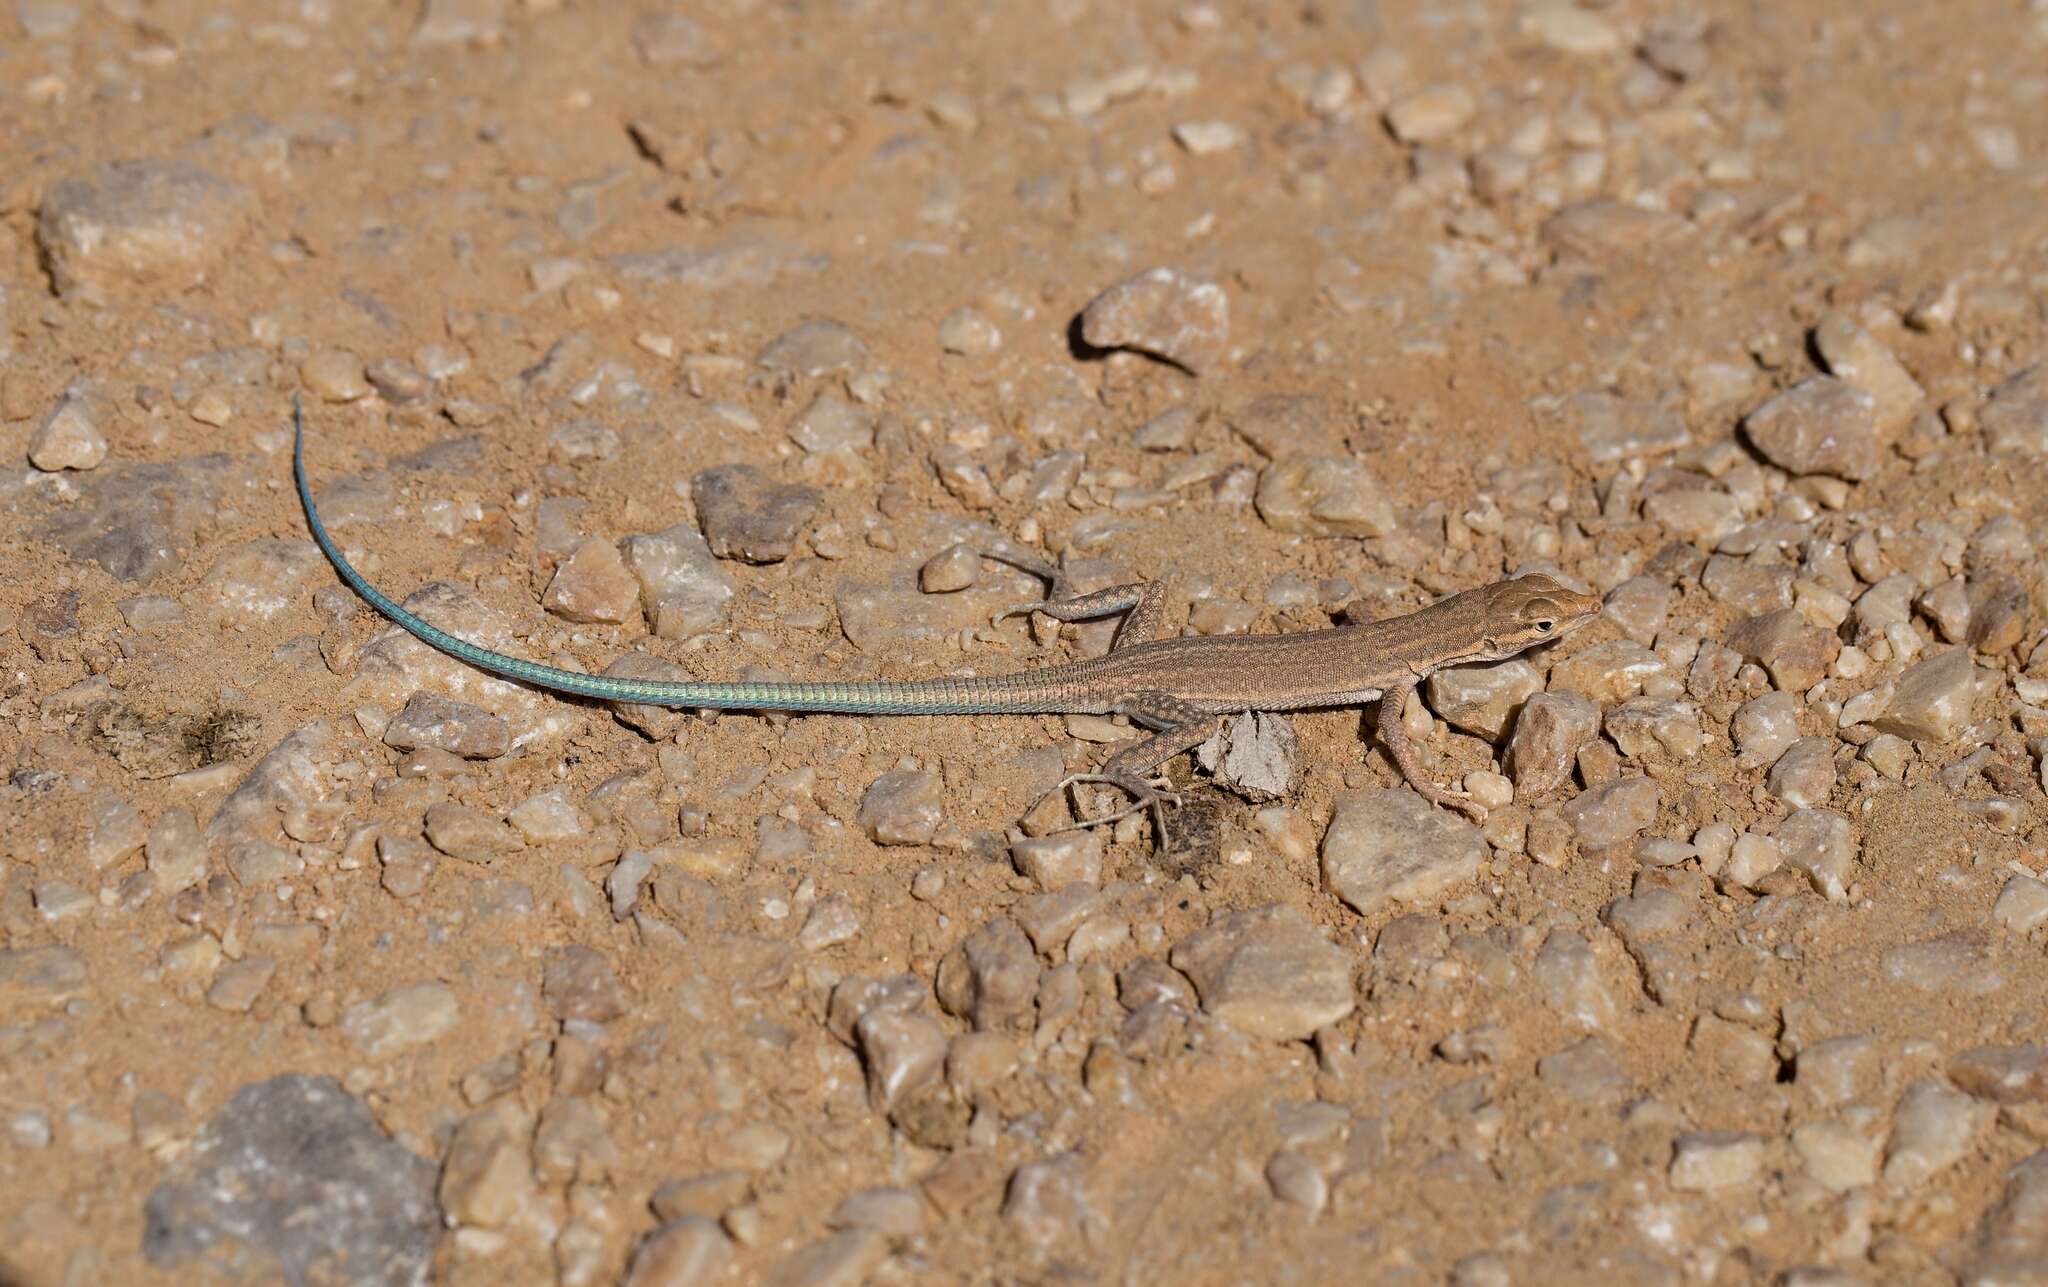 Image of Arnold's Sand Lizard